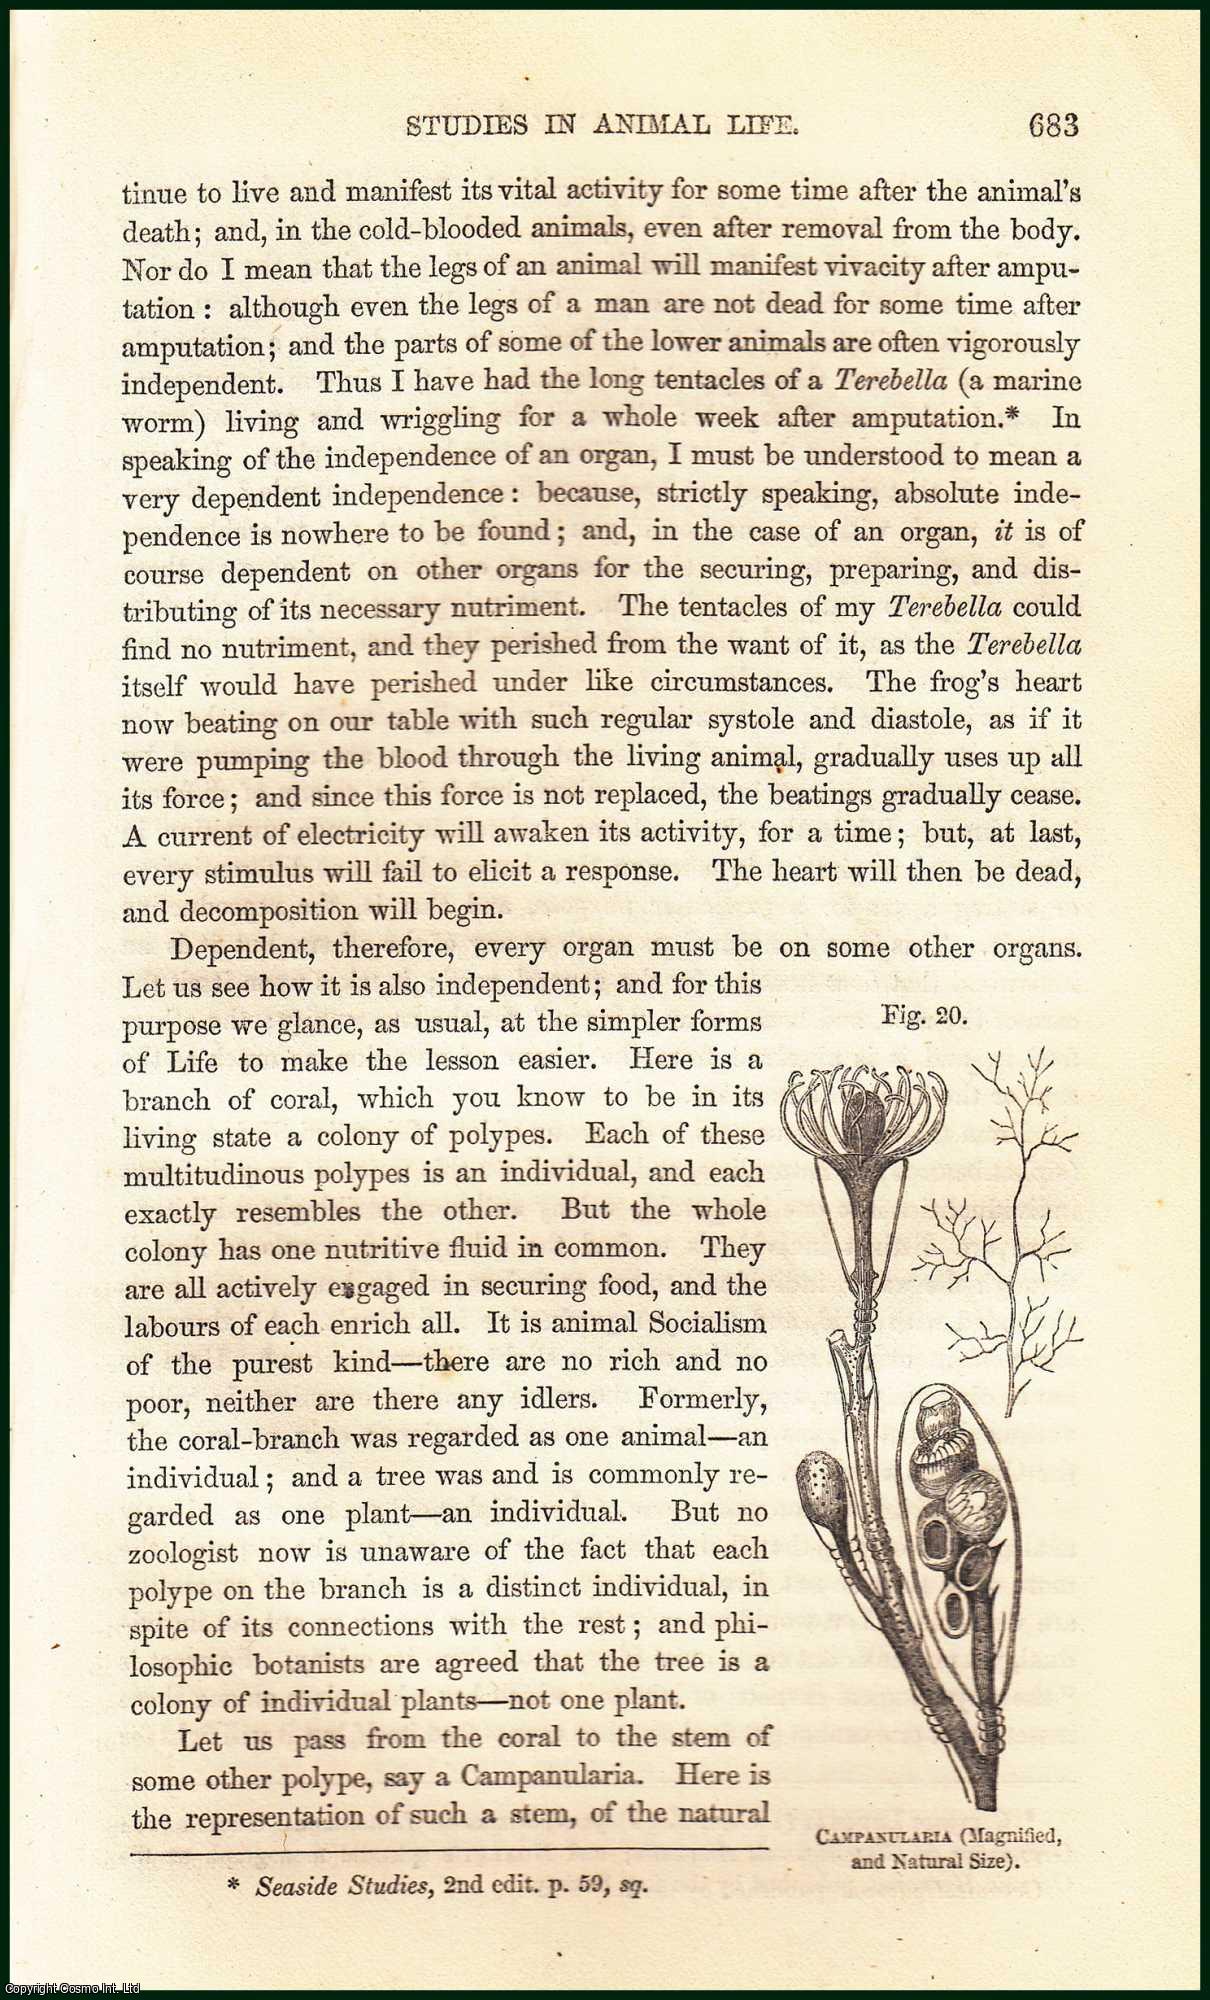 G.H. Lewes - Studies in Animal Life (part 6). An uncommon original article from the Cornhill Magazine, 1860.